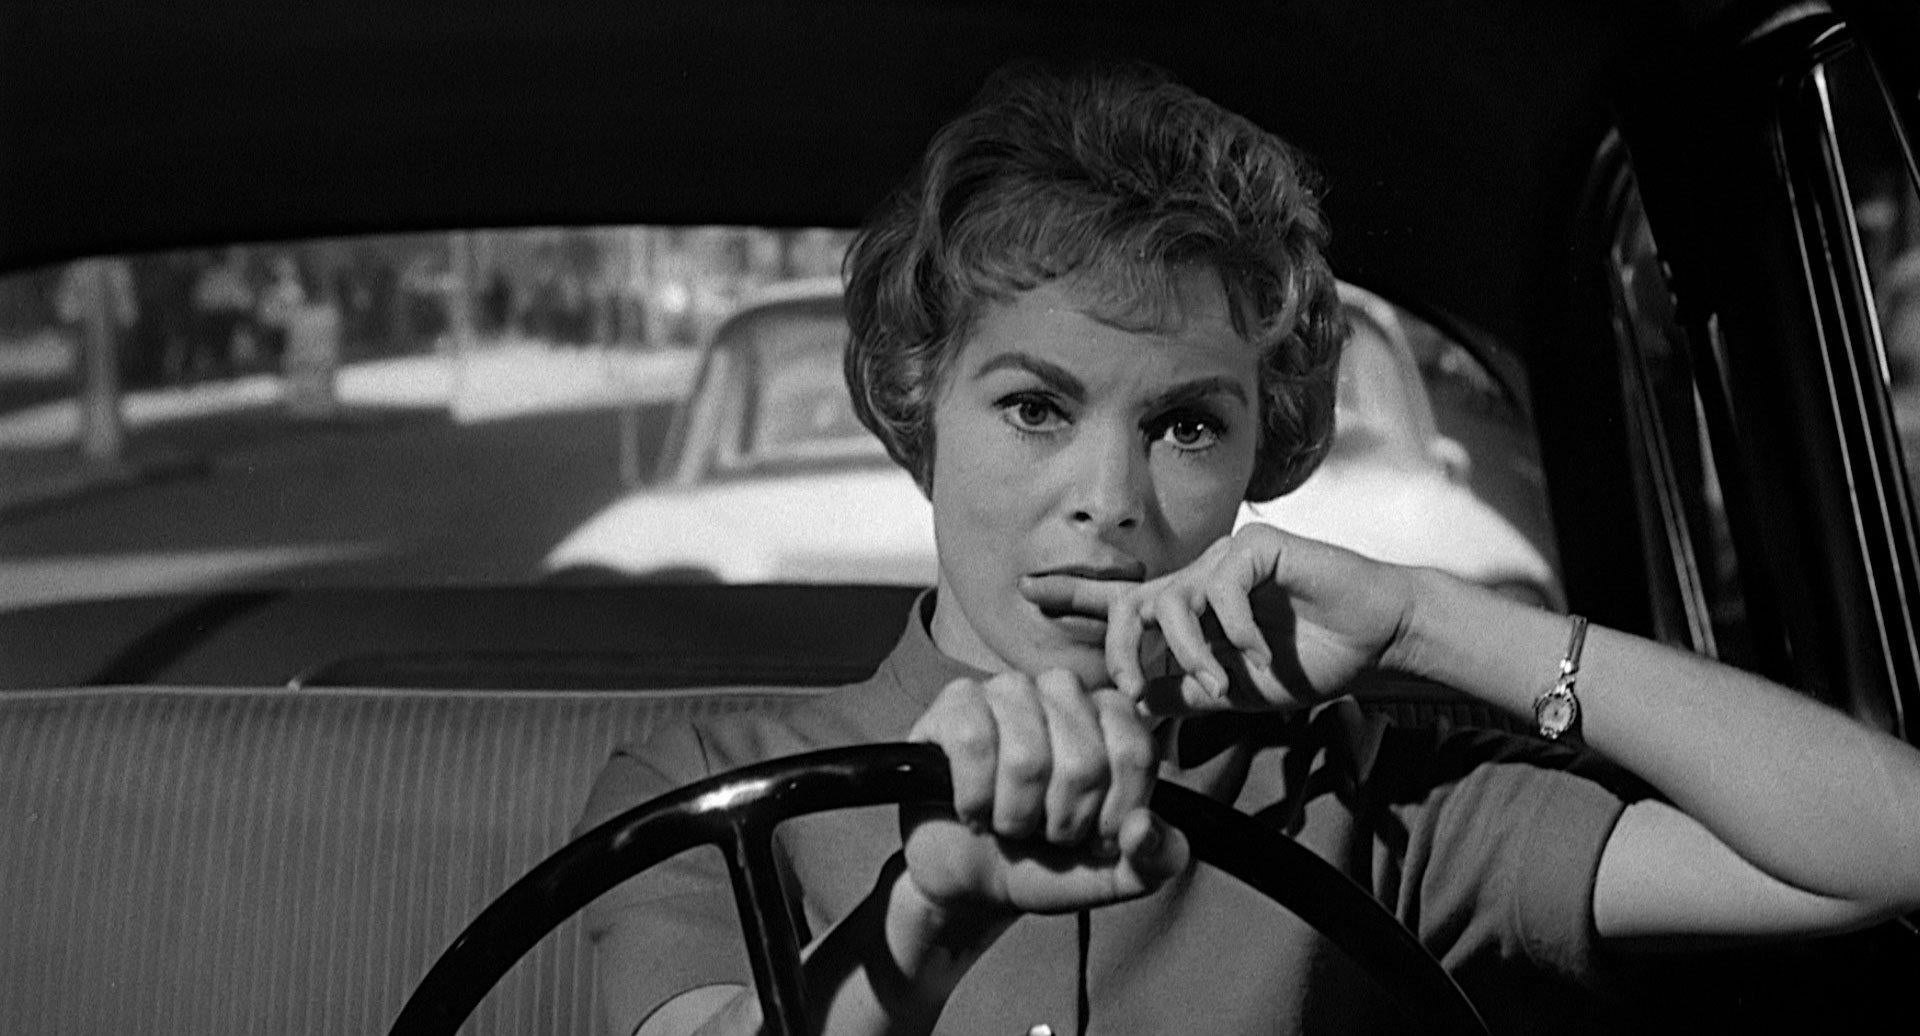 janet-leigh-as-marion-psycho-1960